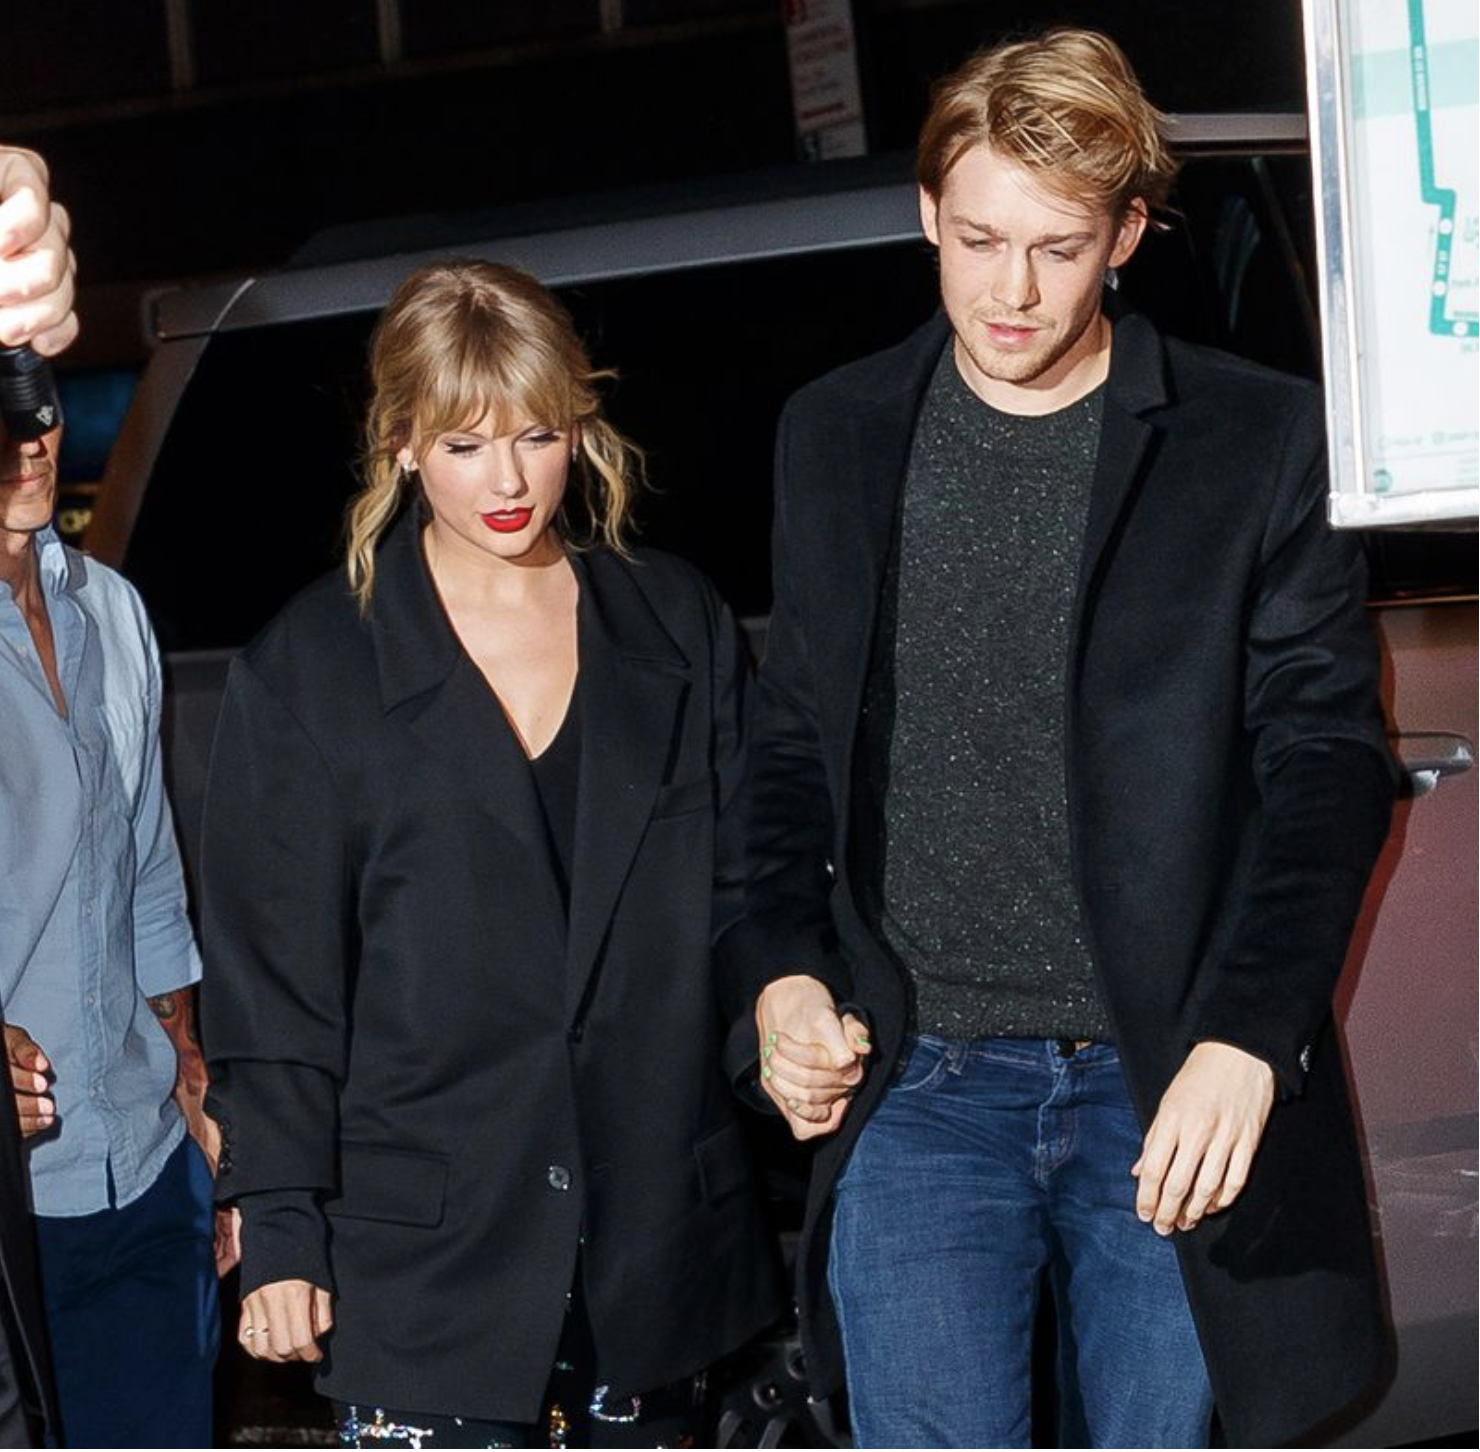 Taylor Swift and Joe Alwyn arrive at Zuma on Oc. 6, 2019 in New York City. (Jackson Lee/GC Images)